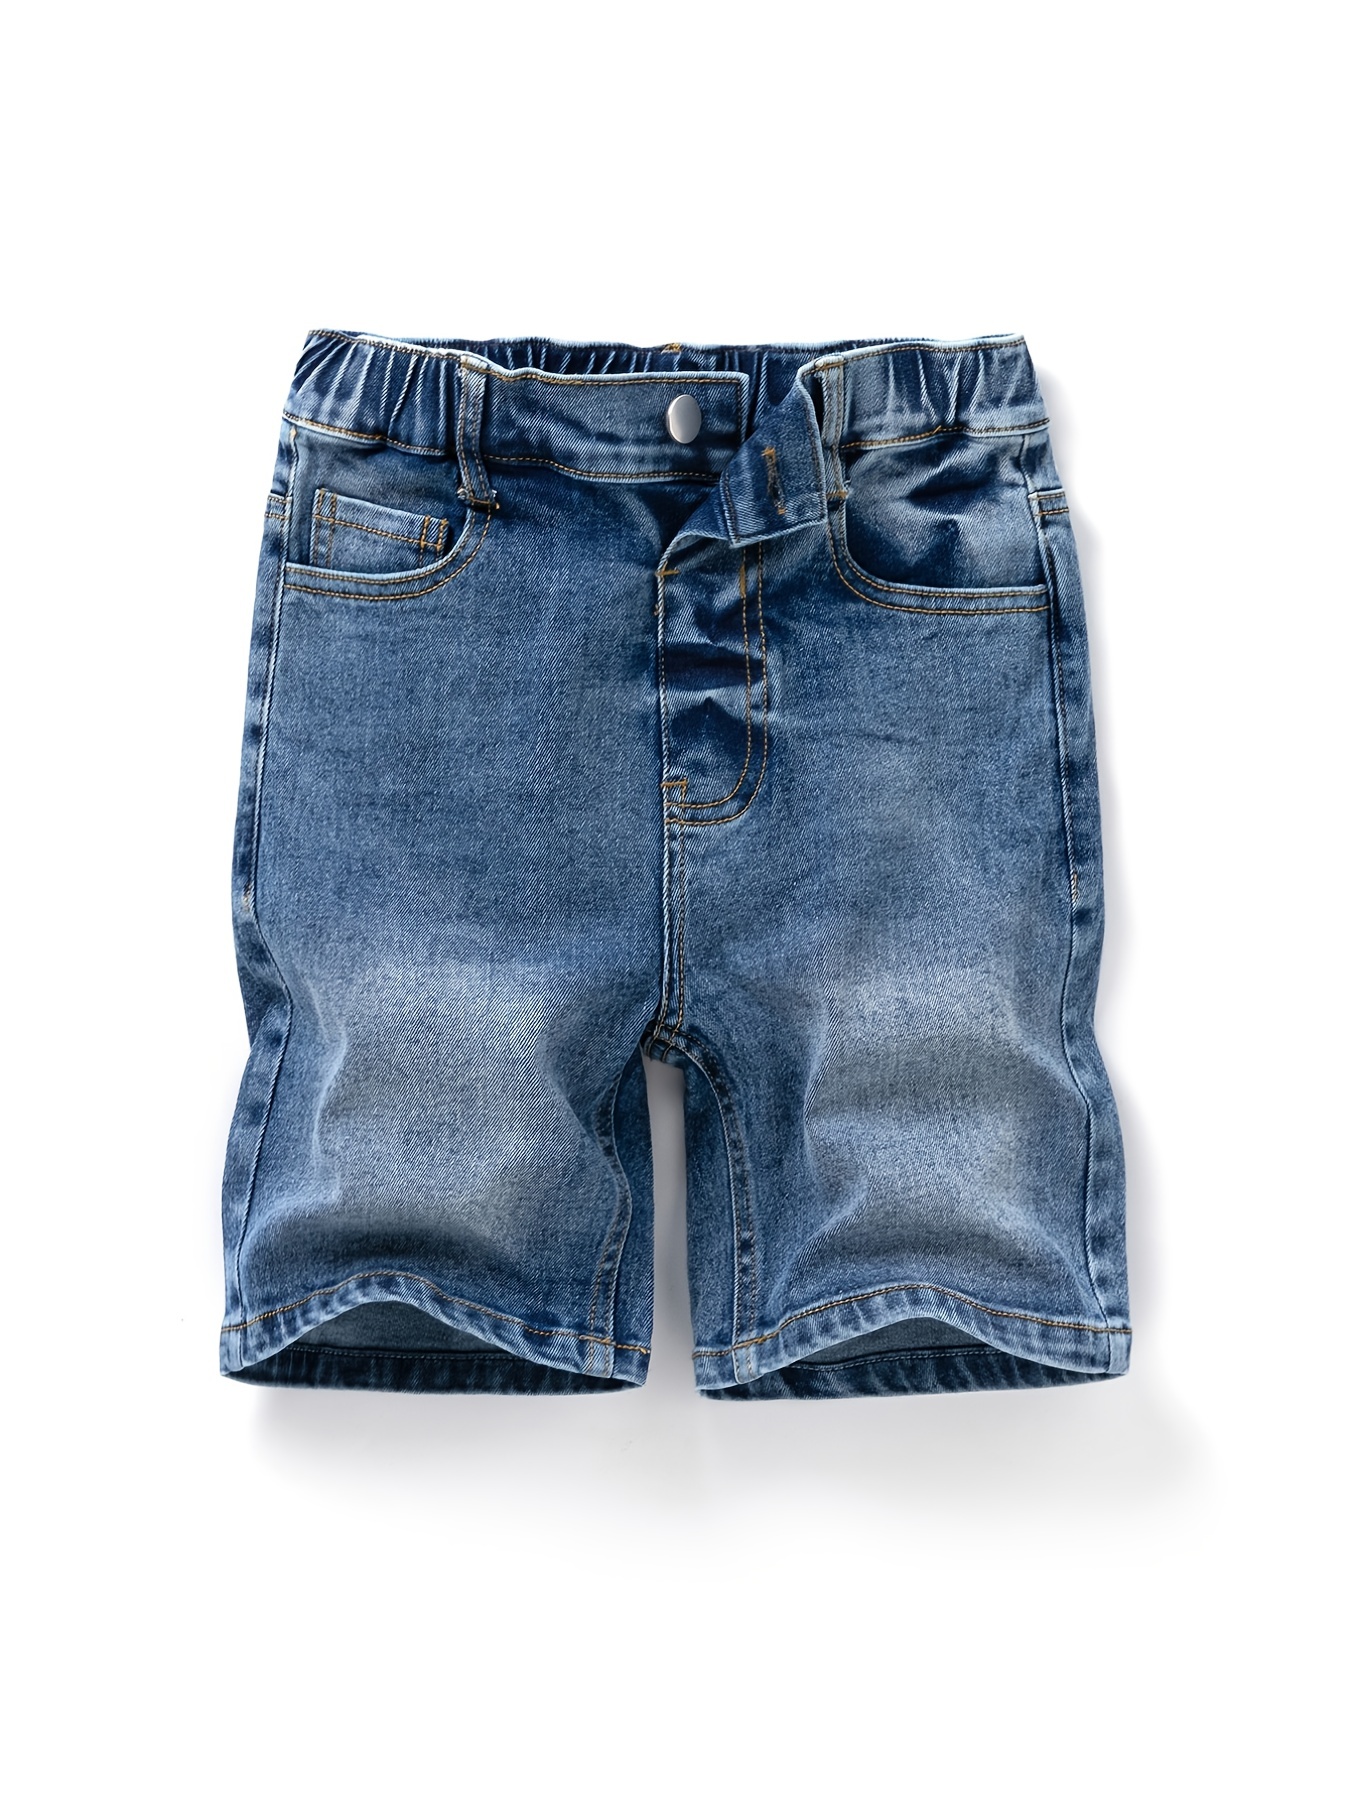 Summer Denim Shorts For Girls Pants Teenagers Trousers Casual